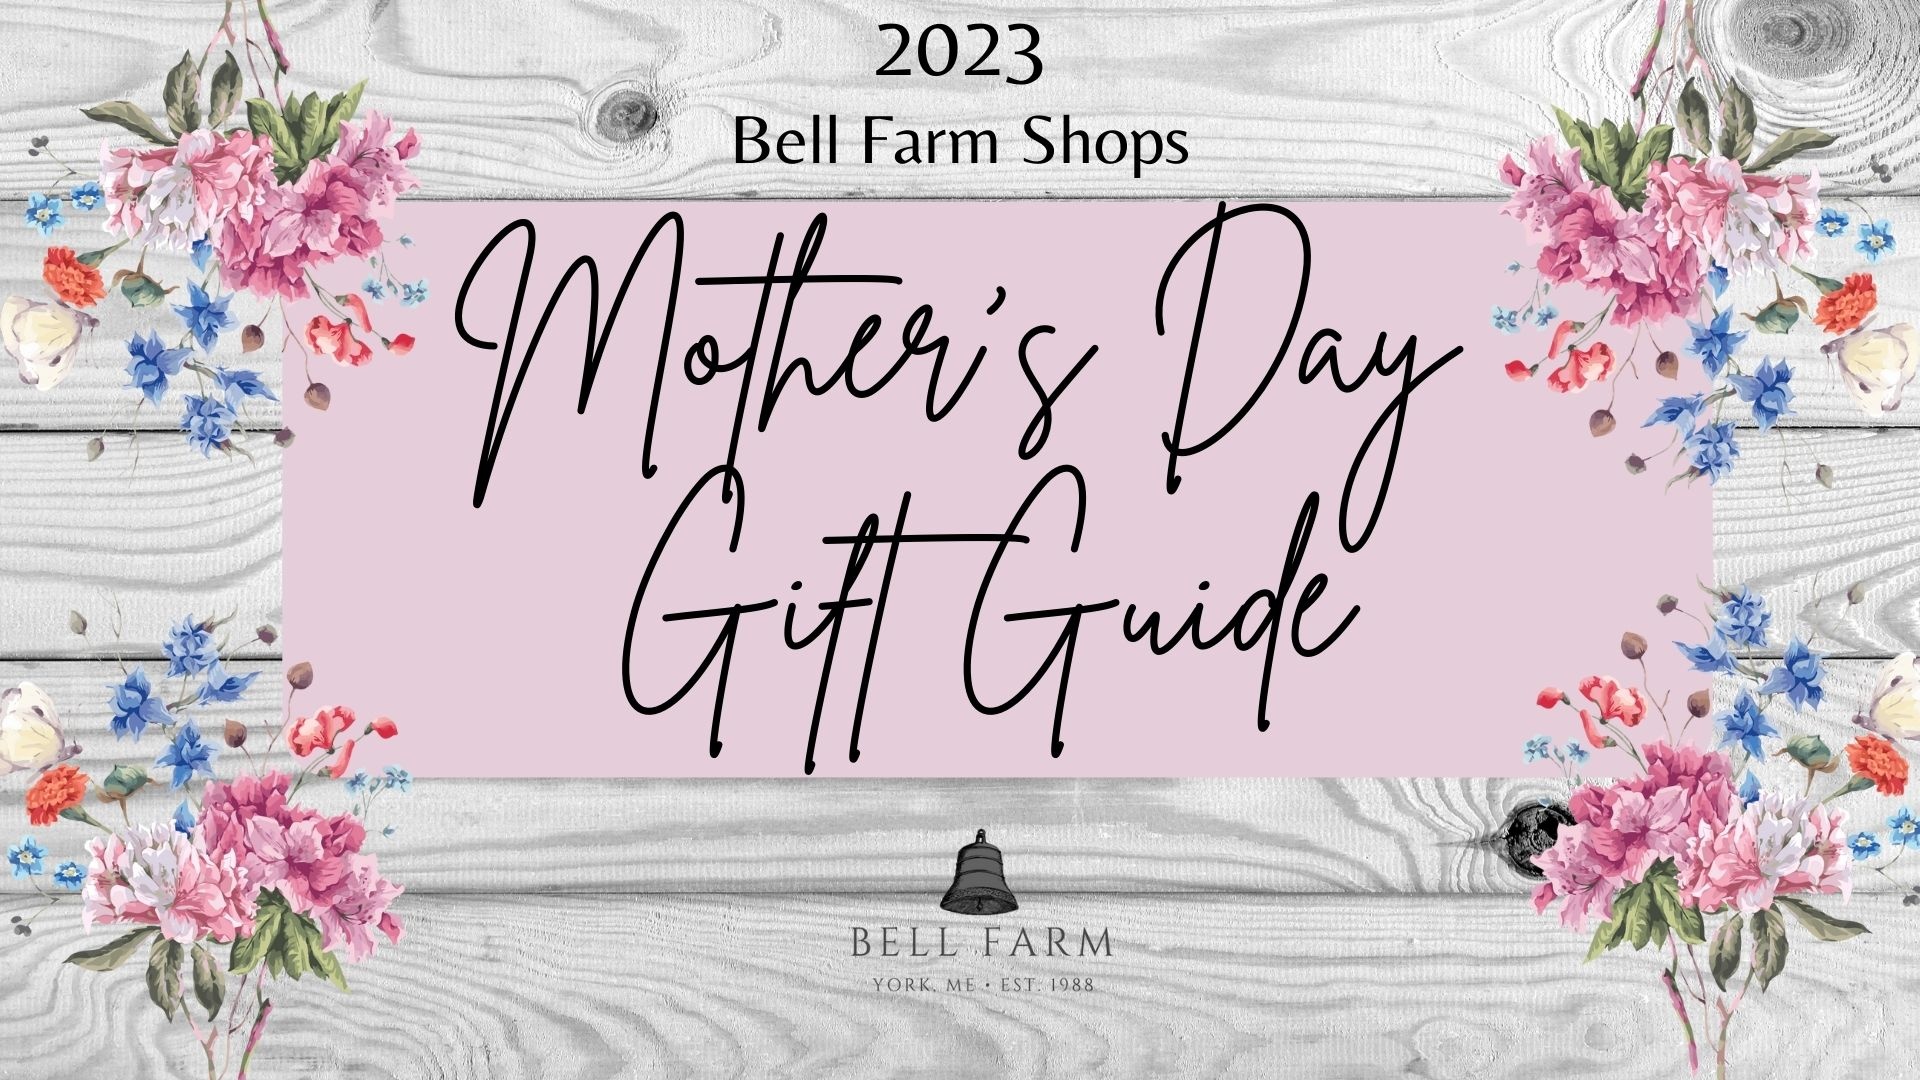 2023 Bell Farm Shops Mother's Day Gift Guide